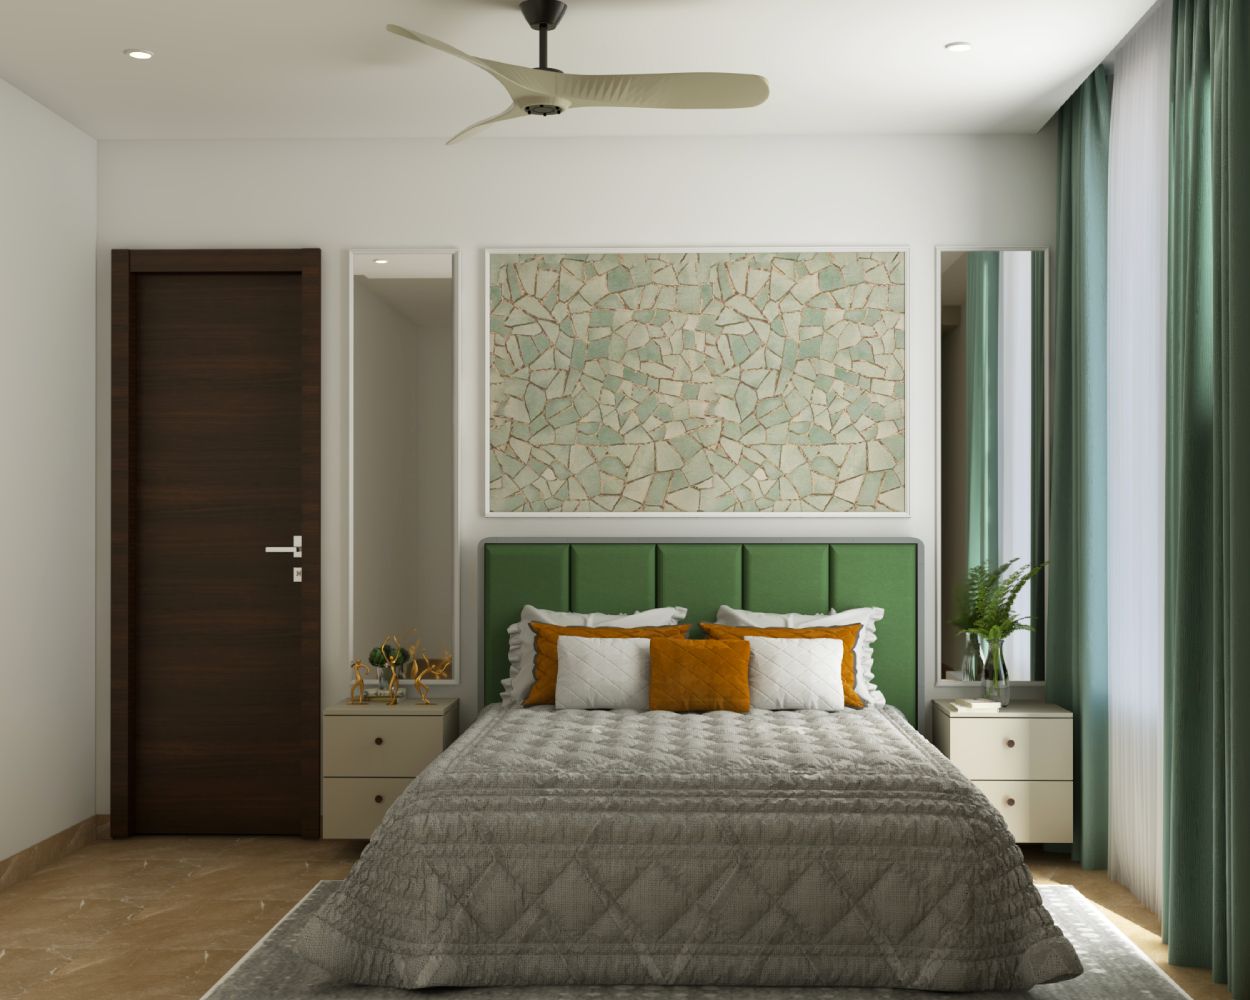 Modern White And Green Master Bedroom Design With Mosaic Wallpaper And Wall Trims